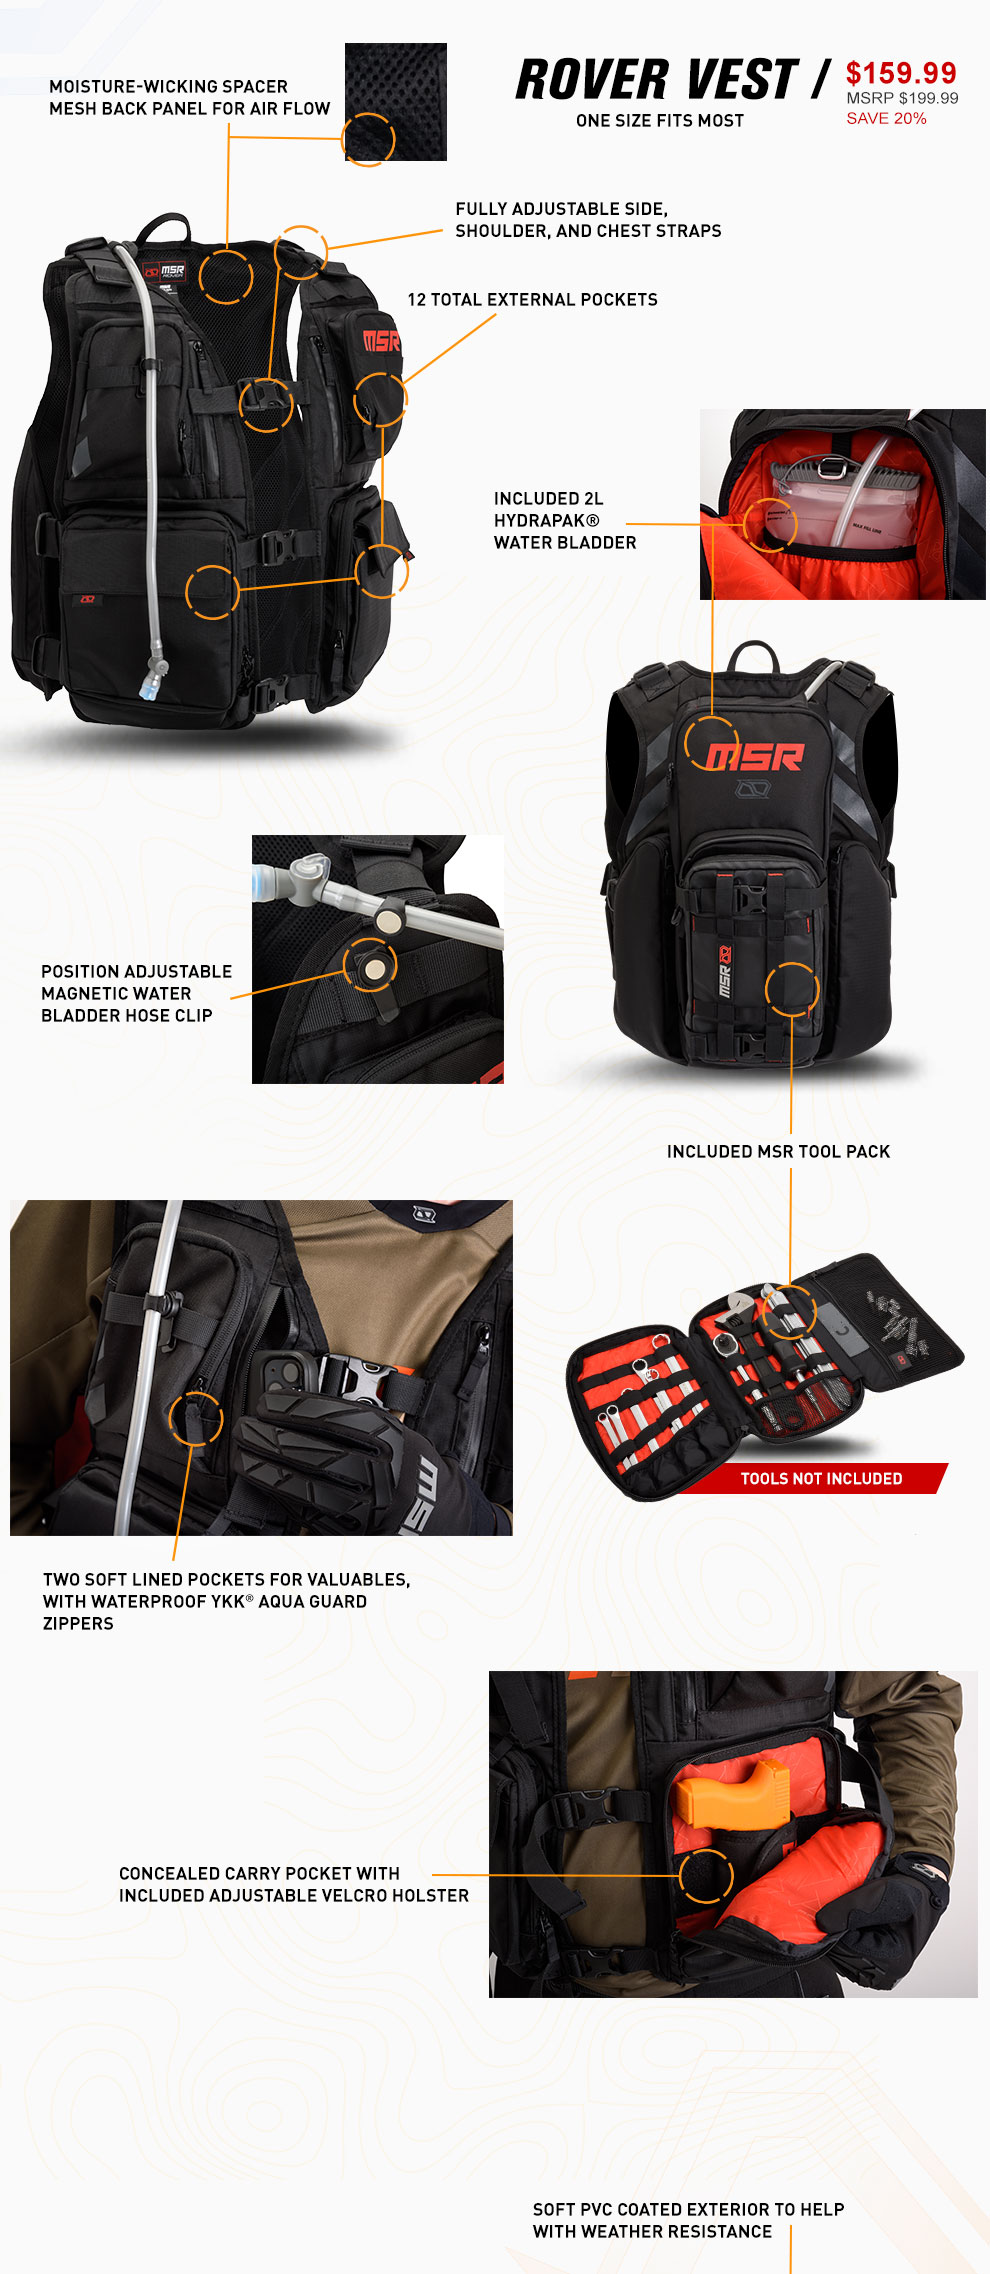 Rover Vest, $159 and 99 cents, MSRP $199 and 99 cents, Save 20 percent, a front view of the vest, back view of the vest